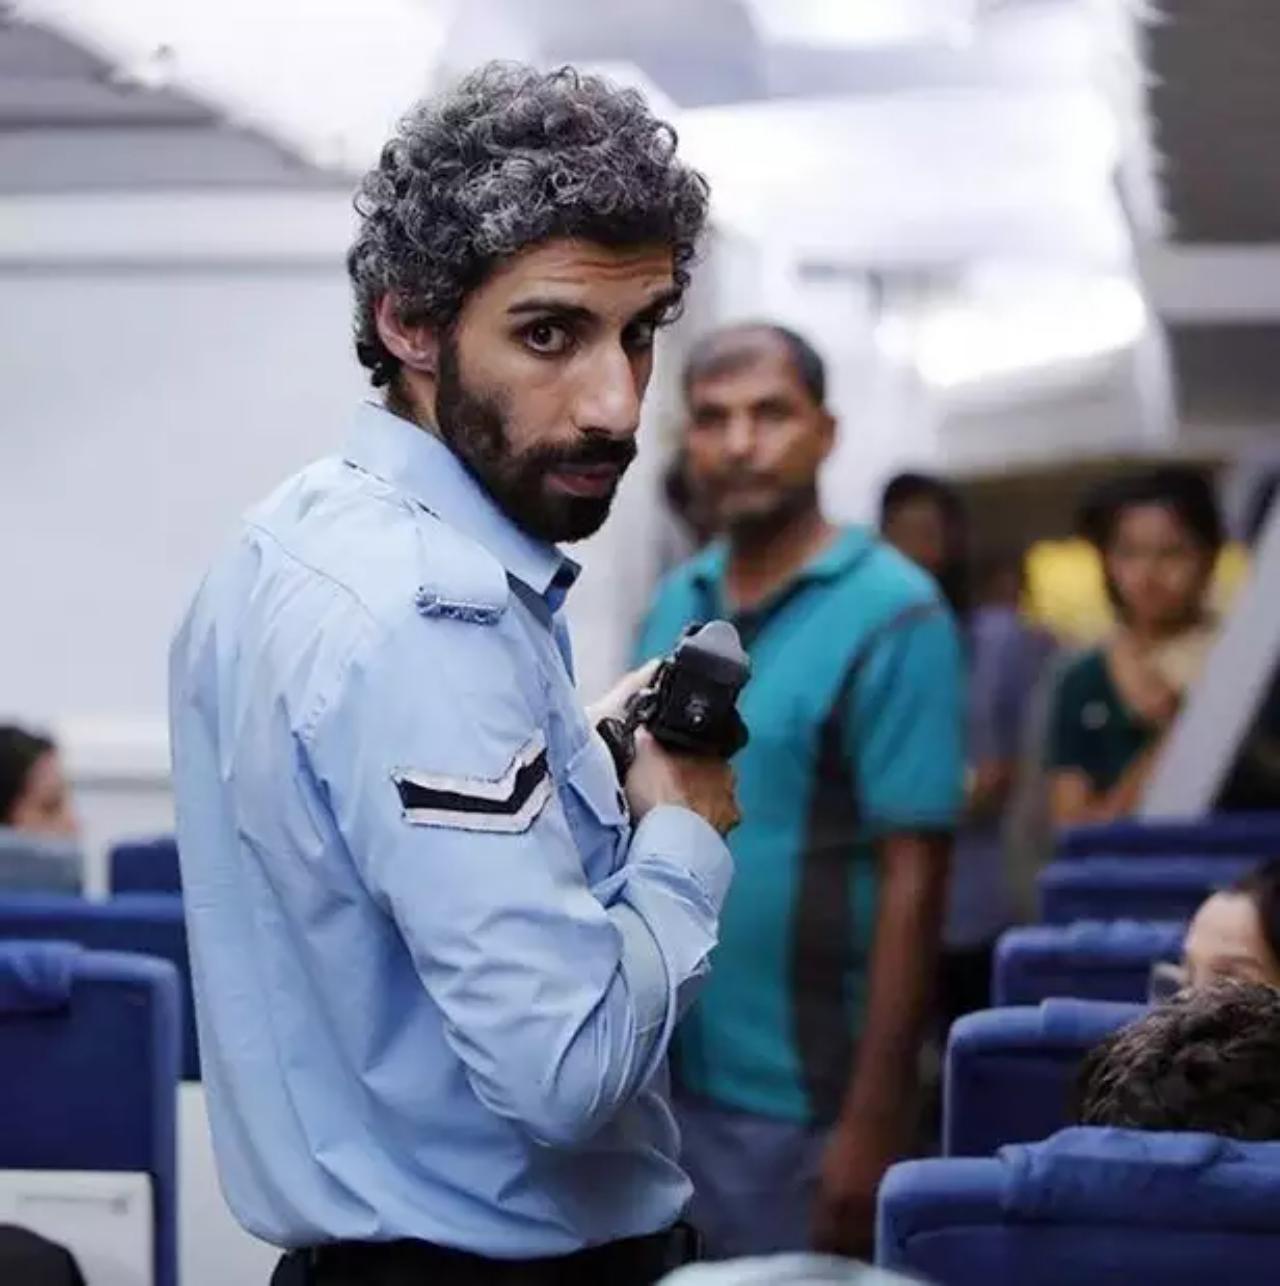 Neerja
Jim Sarbh made a stunning debut as a Palestinian hijacker, Khalil in 'Neerja' in 2016. After starring in theatre productions such as Kalki Koechlin's 'The Living Room,' Sarbh made a leap to the big screen in this film starring Sonam Kapoor, based on the martyred air hostess Neerja Bhanot on the legendary 1986 Pan Am flight.
 